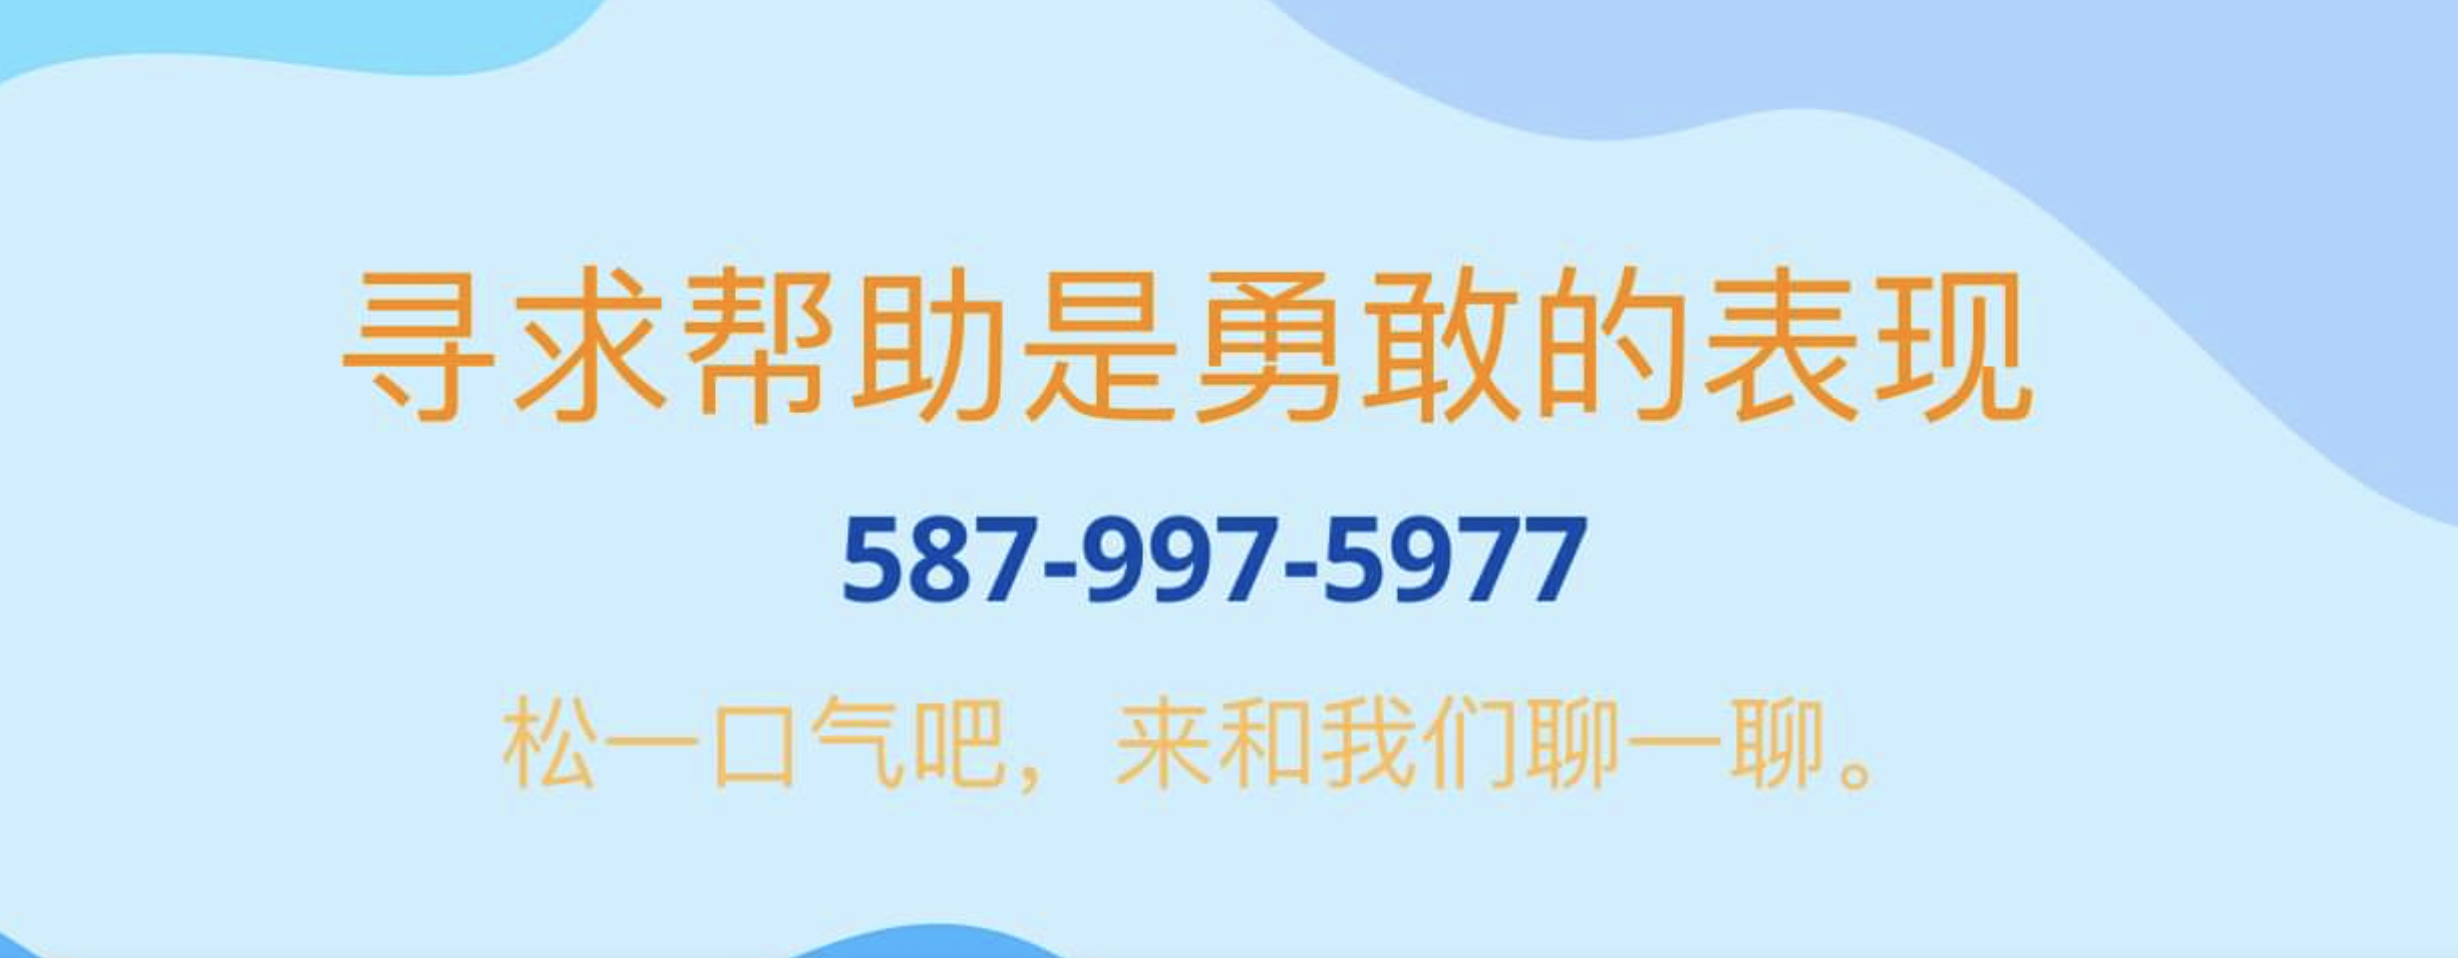 chinese-emotional-support-hotline.png